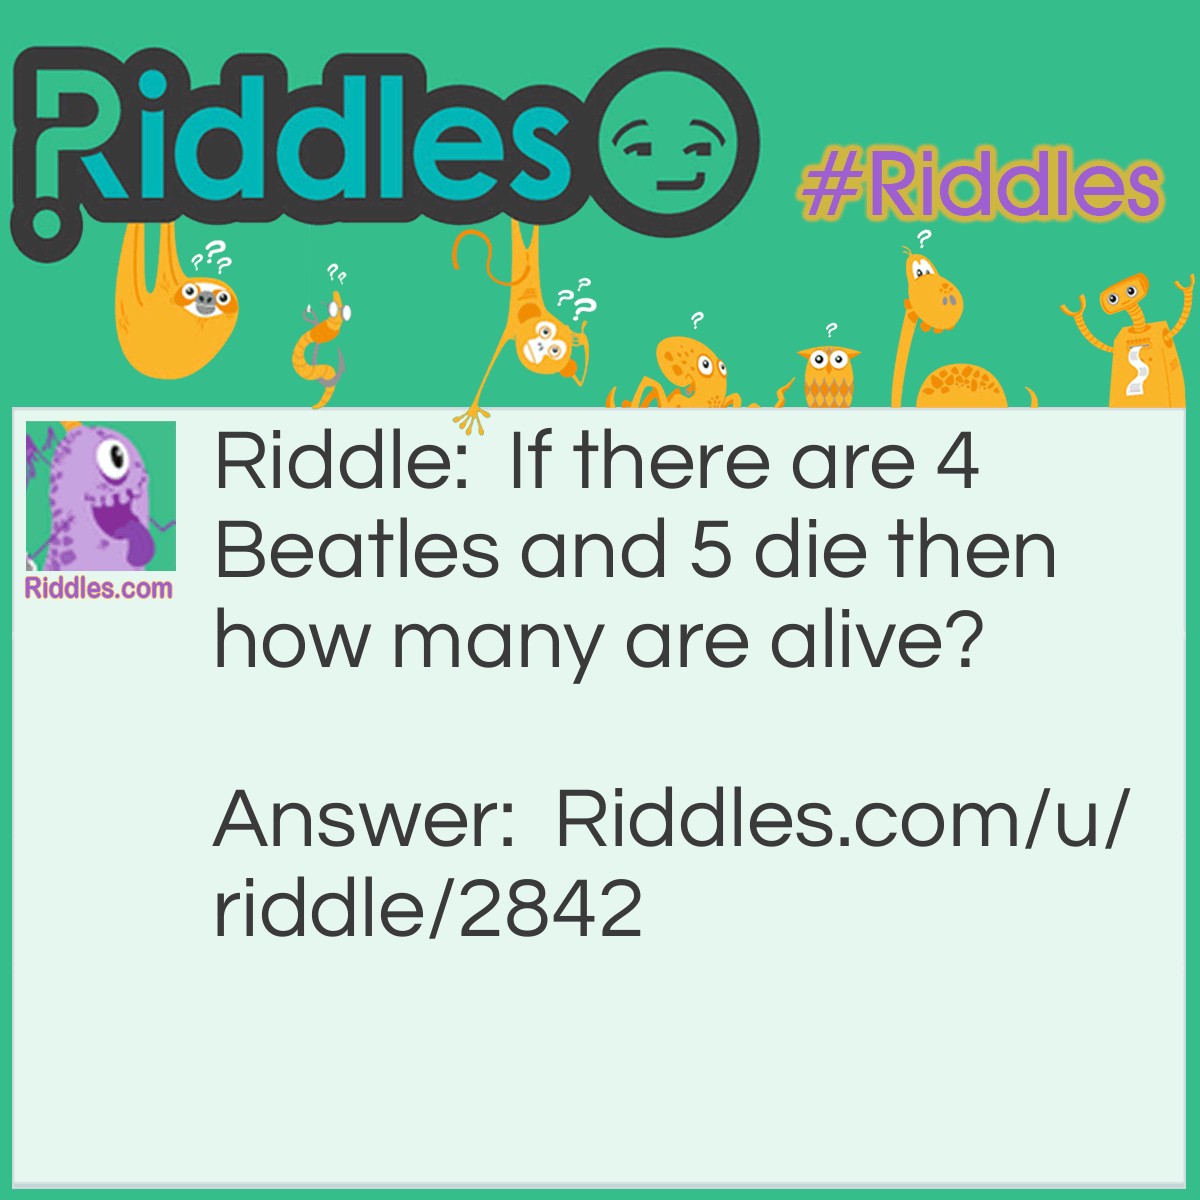 Riddle: If there are 4 Beatles and 5 die then how many are alive? Answer: 5 are alive (Paul, Ringo, Chas, Pete, Jimmie) because there's 10 altogether.